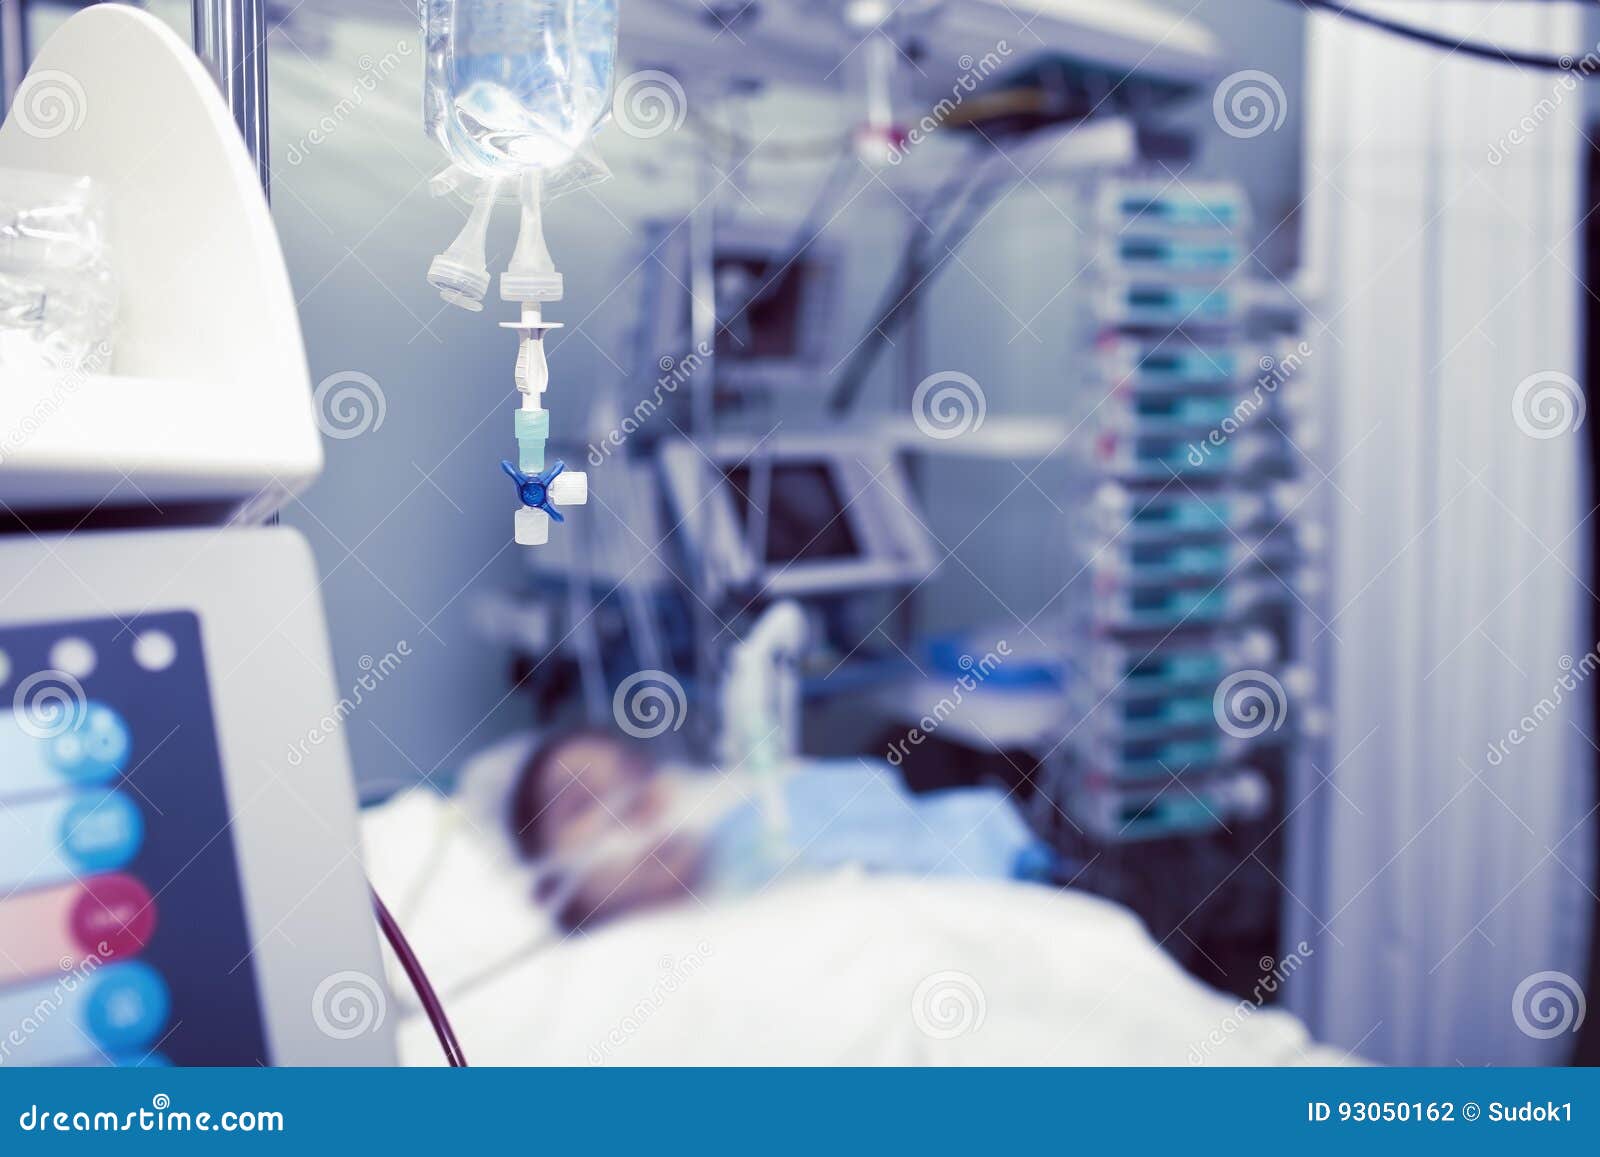 patient in the intensive care unit